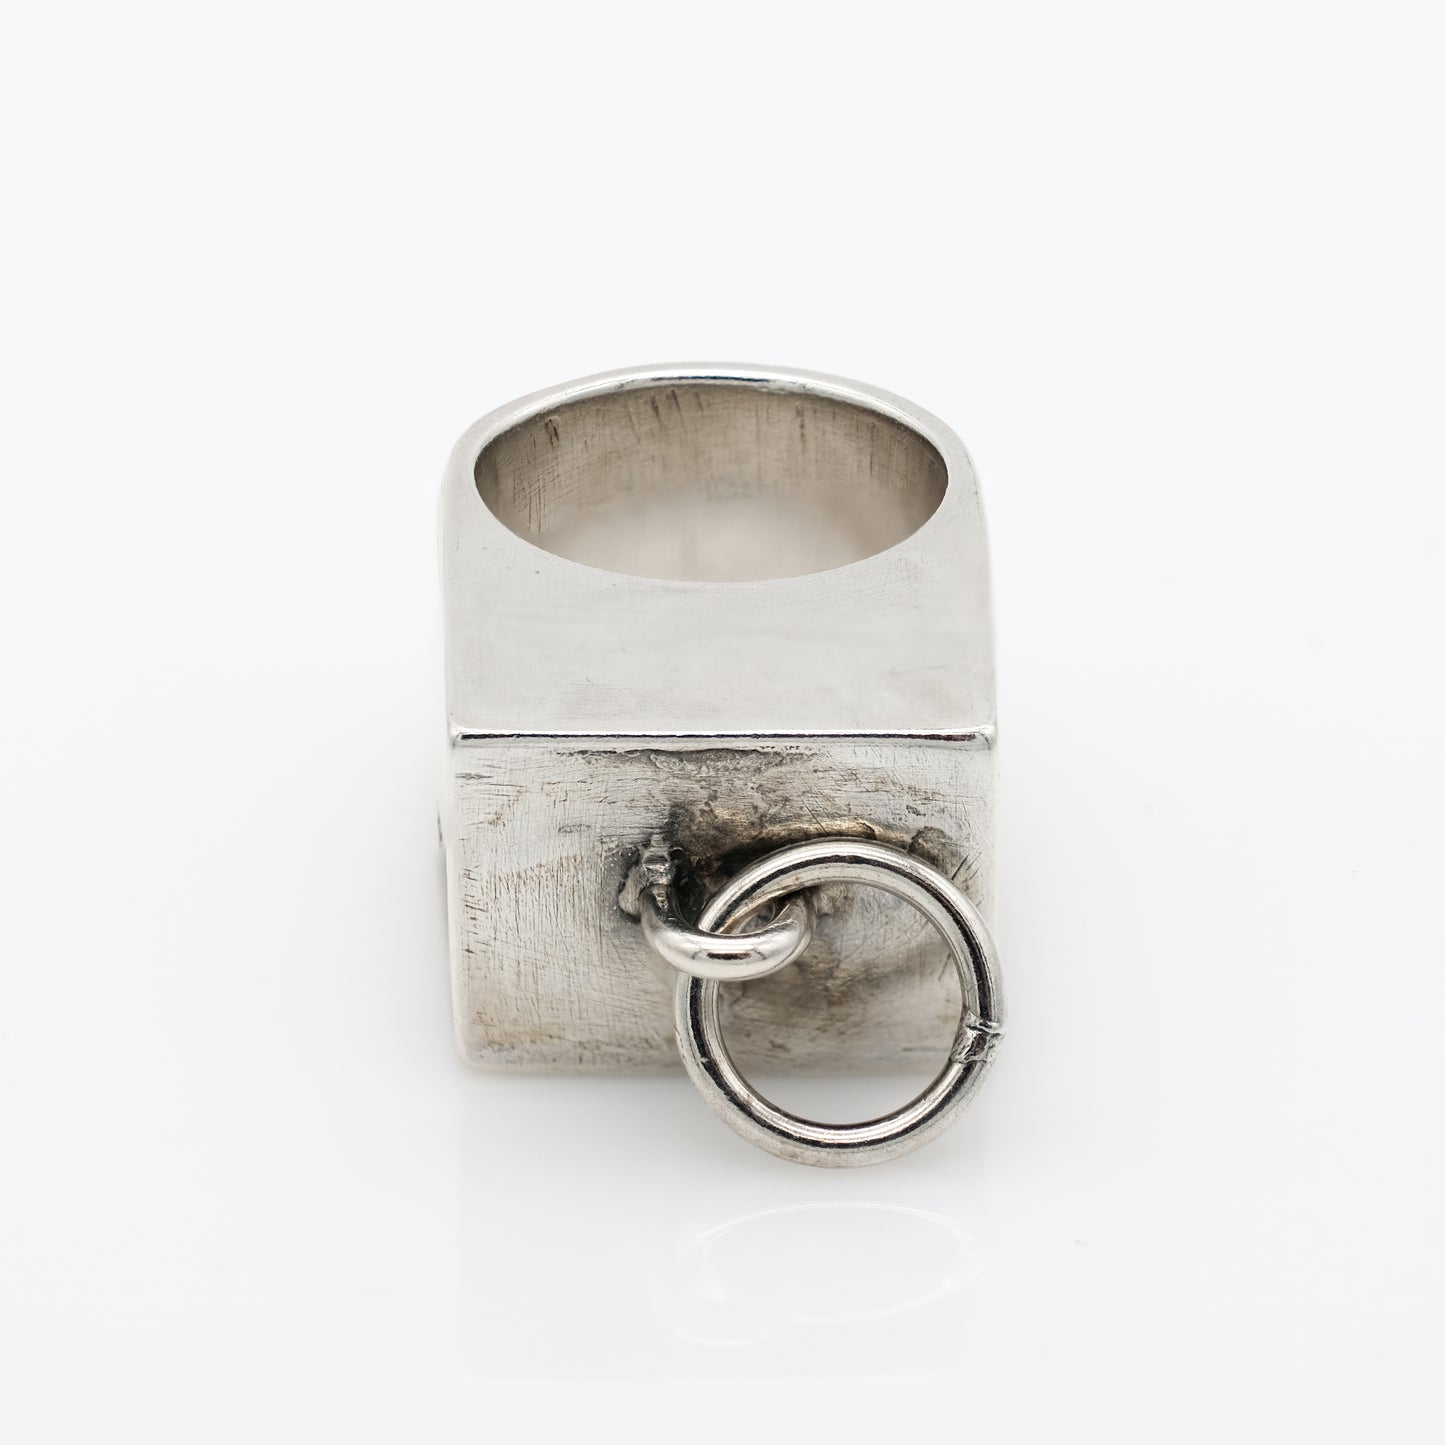 LARGE HOLLOW CAPTIVE RING